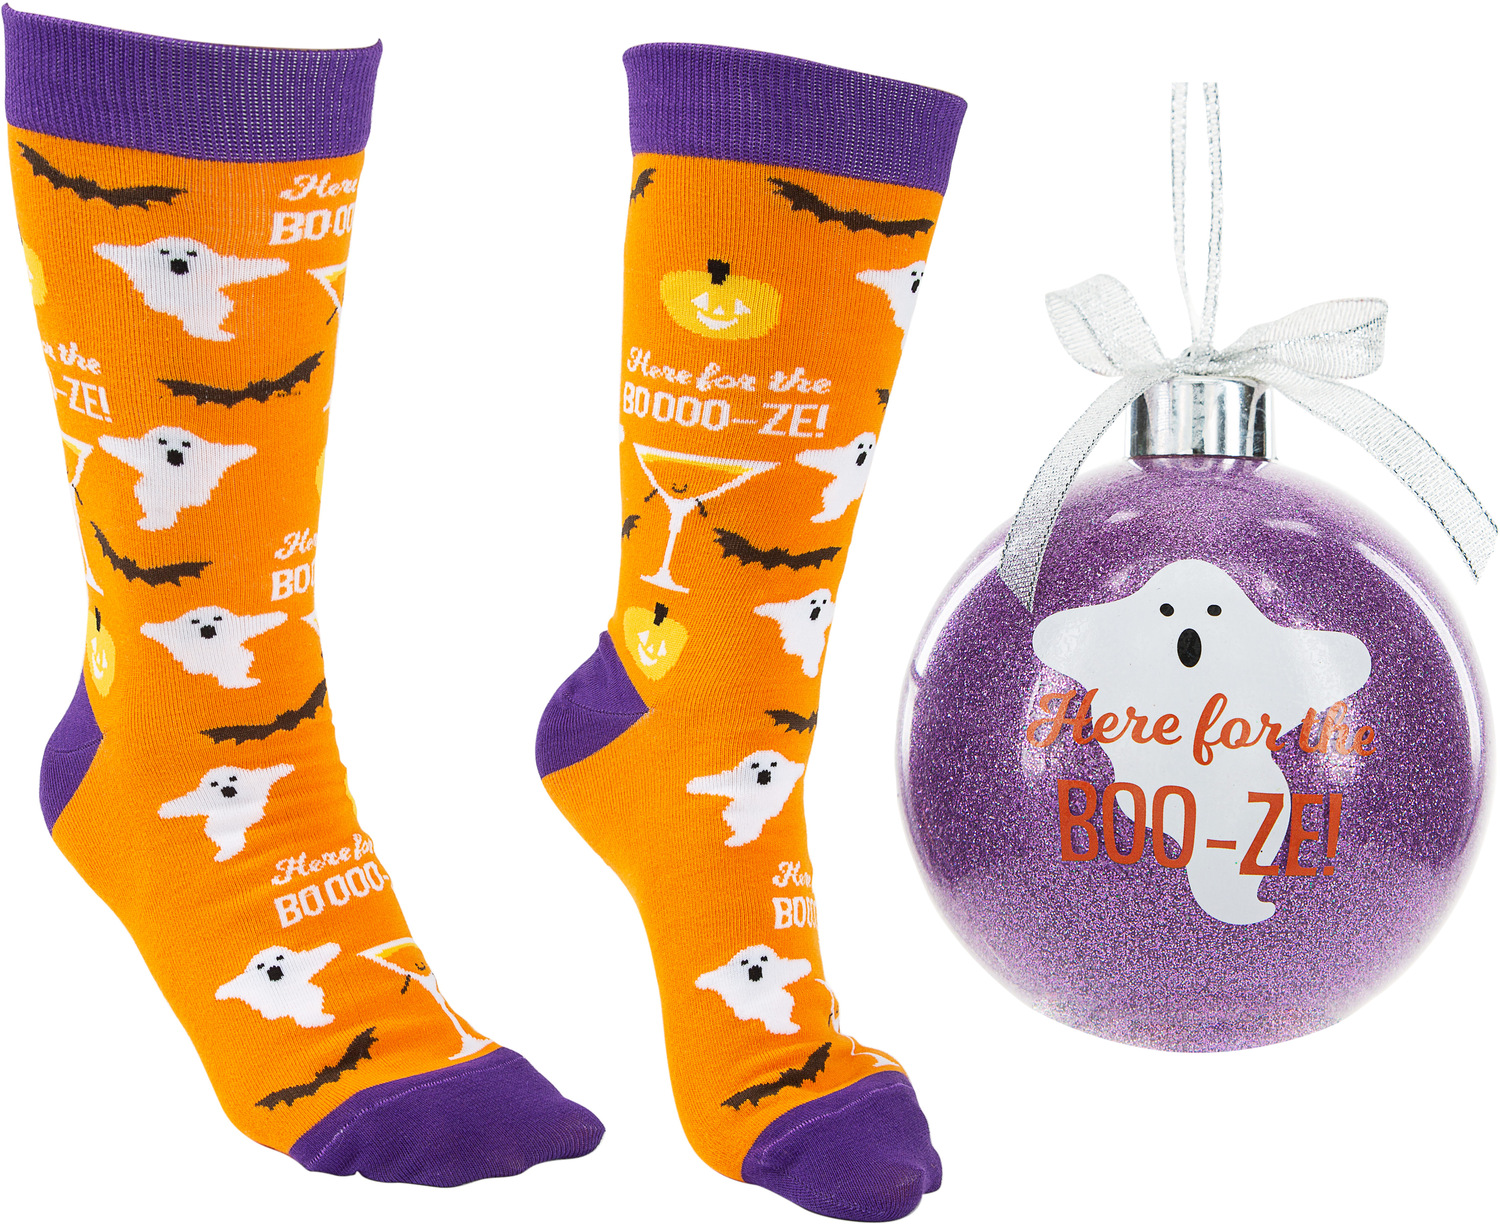 Boo-ze! by Late Night Last Call - Boo-ze! - 4" Ornament  with Unisex Holiday Socks